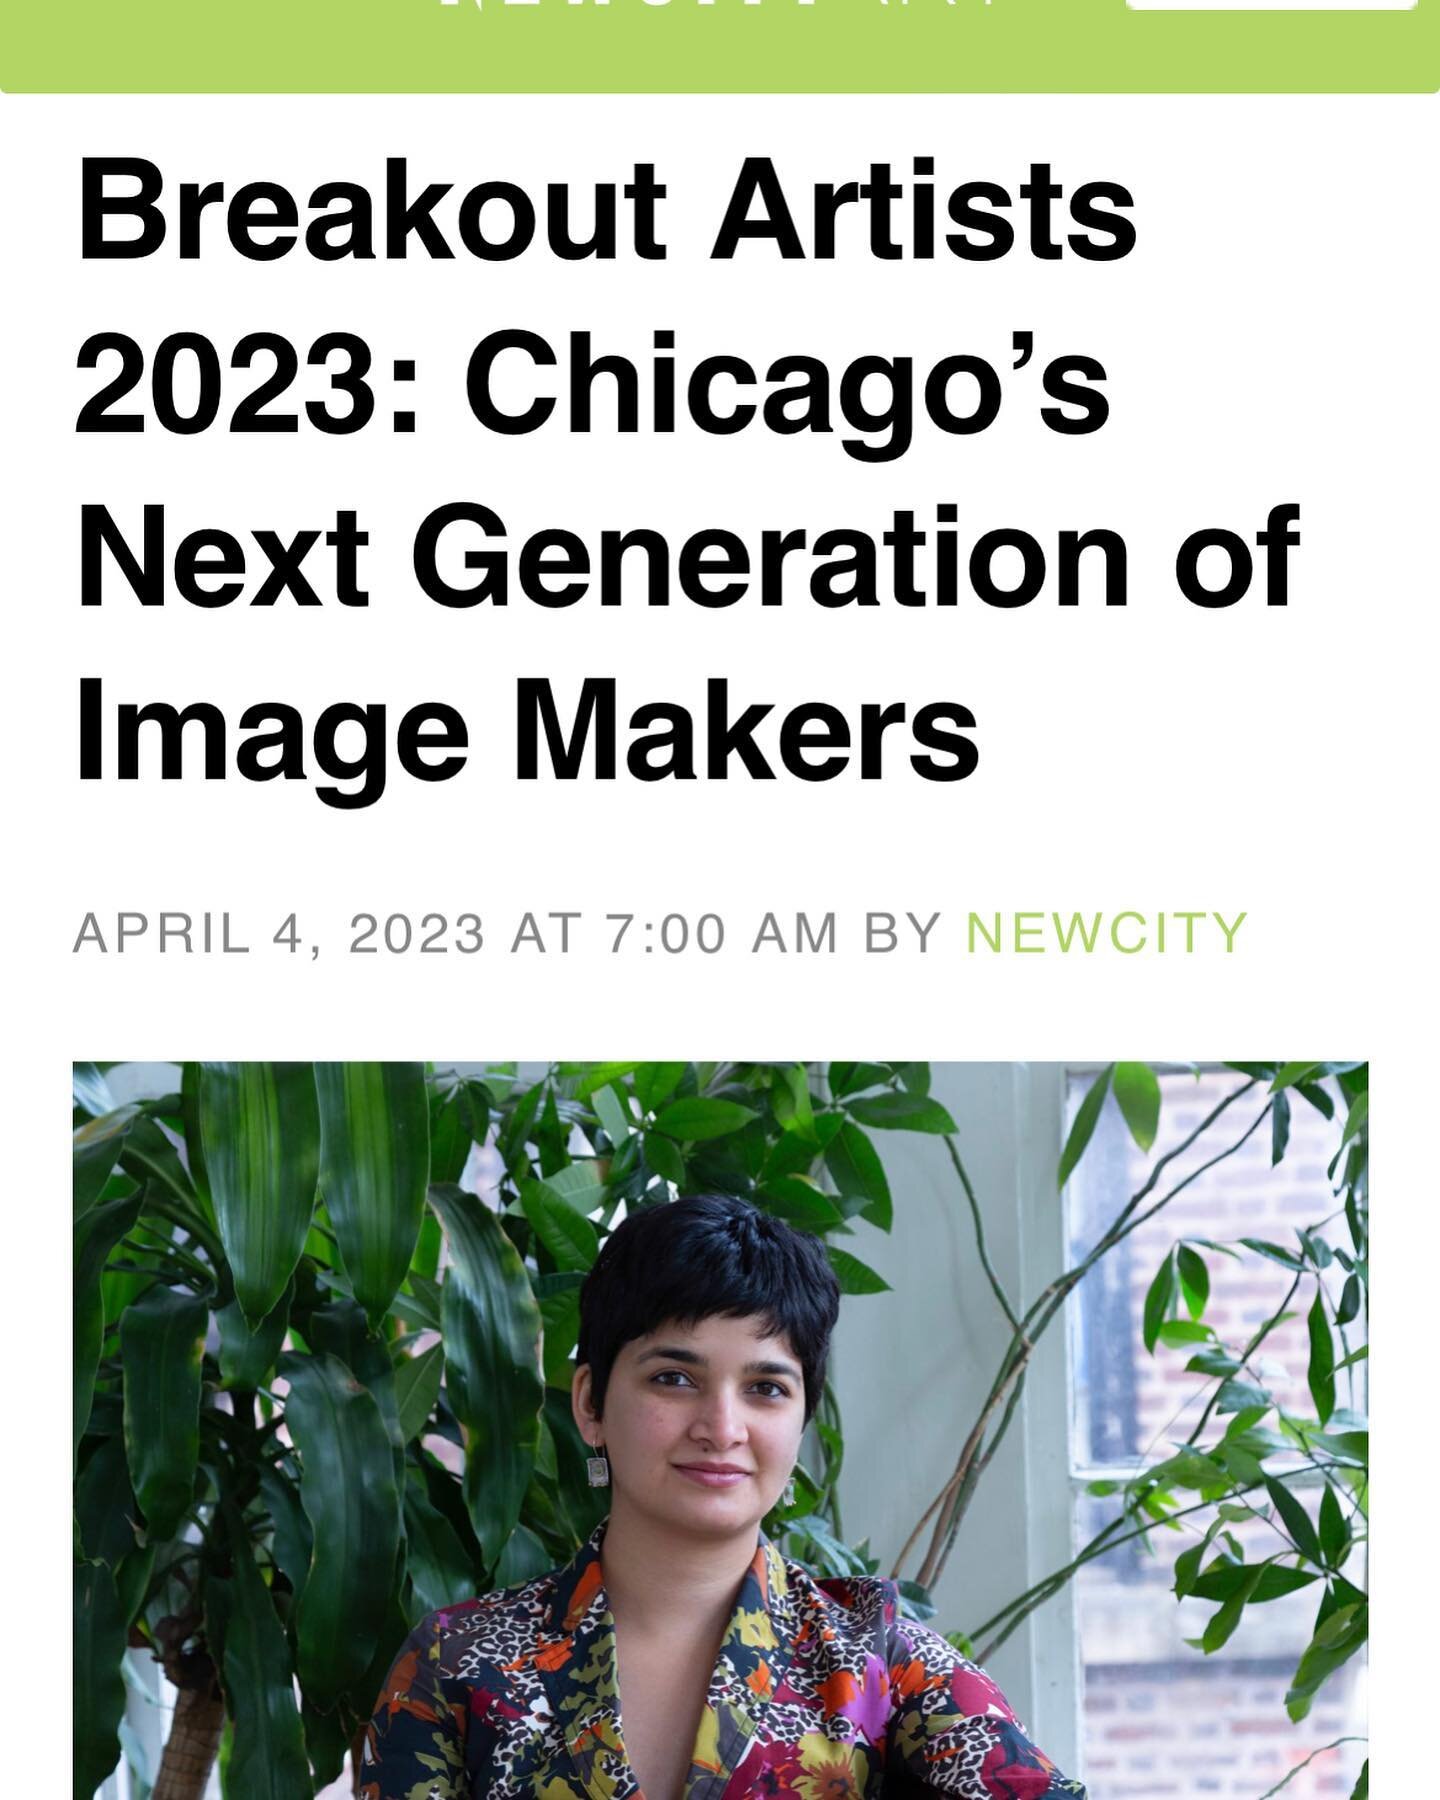 🌺🌺 extremely humbled to be named one of ten 2023 breakout artists by Newcity. 🌺🌺 

I always thought about the long list of thankyou&rsquo;s during award ceremonies and always wondered. Now I know it&rsquo;s because you&rsquo;re never in something